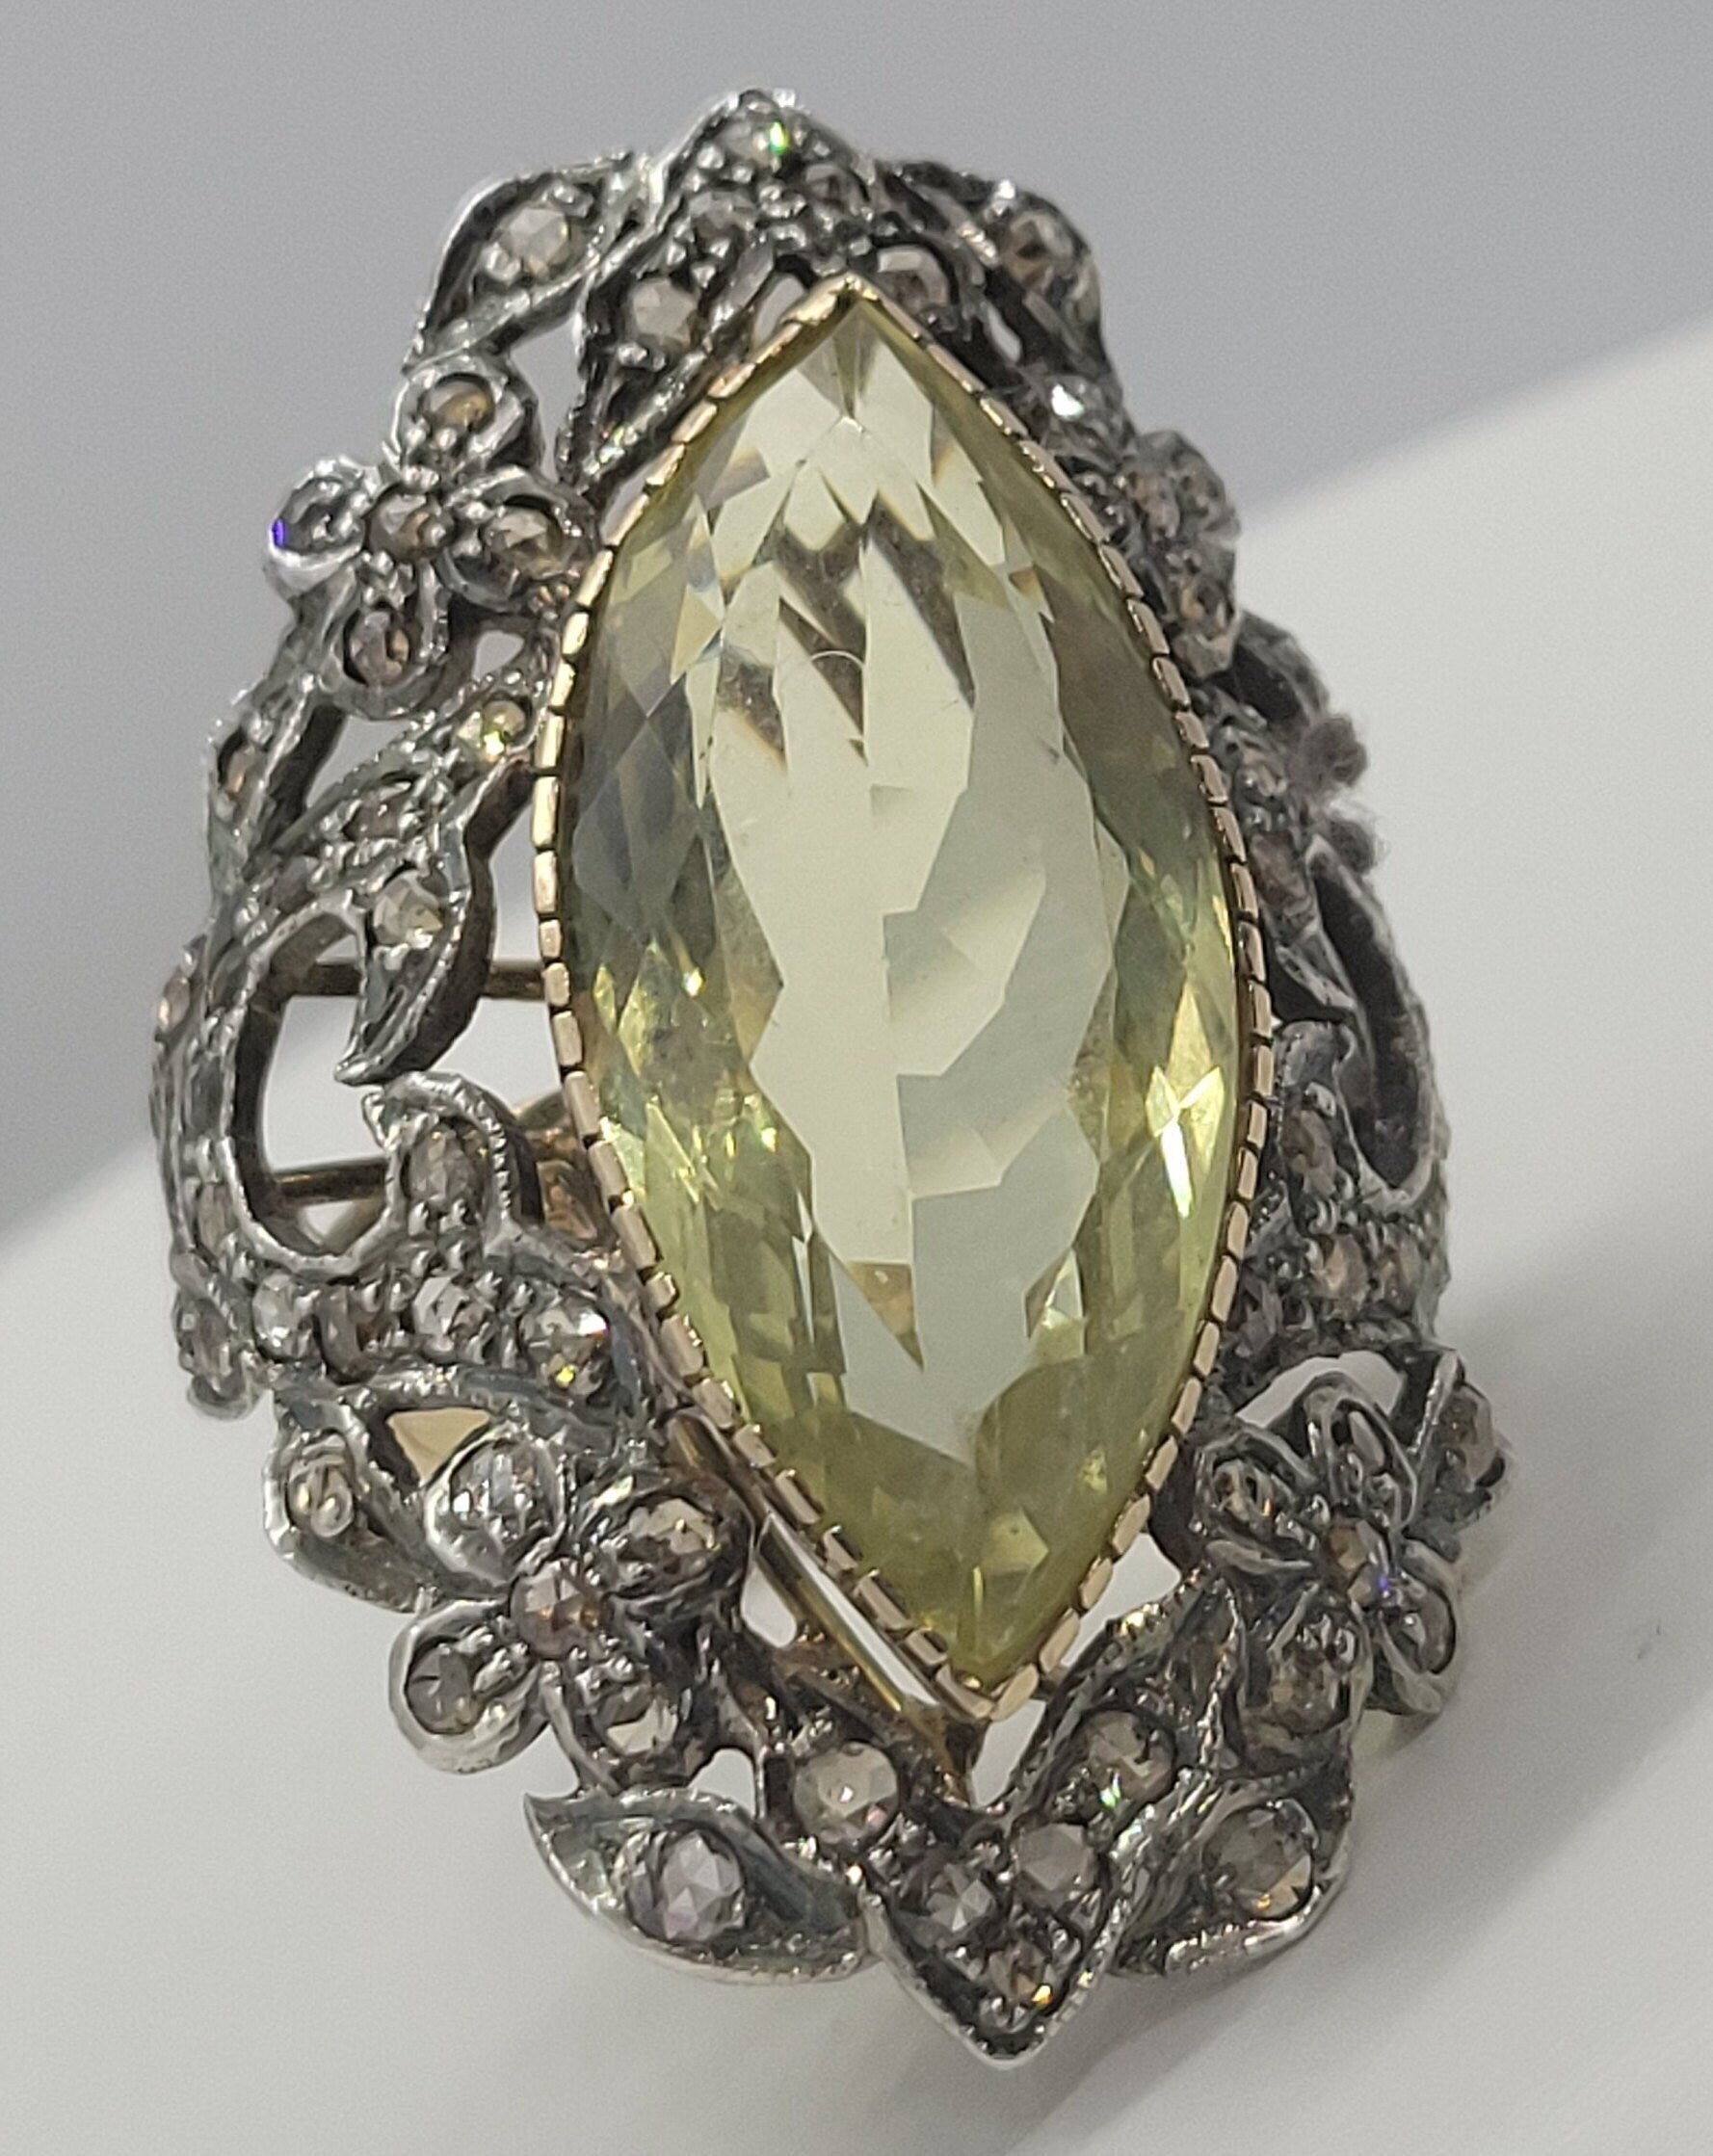 Vintage Lemon Quartz with Diamond in 925 Sterling Silver and 18k Gold Ring with Genuine Lemon Quartz with Diamond